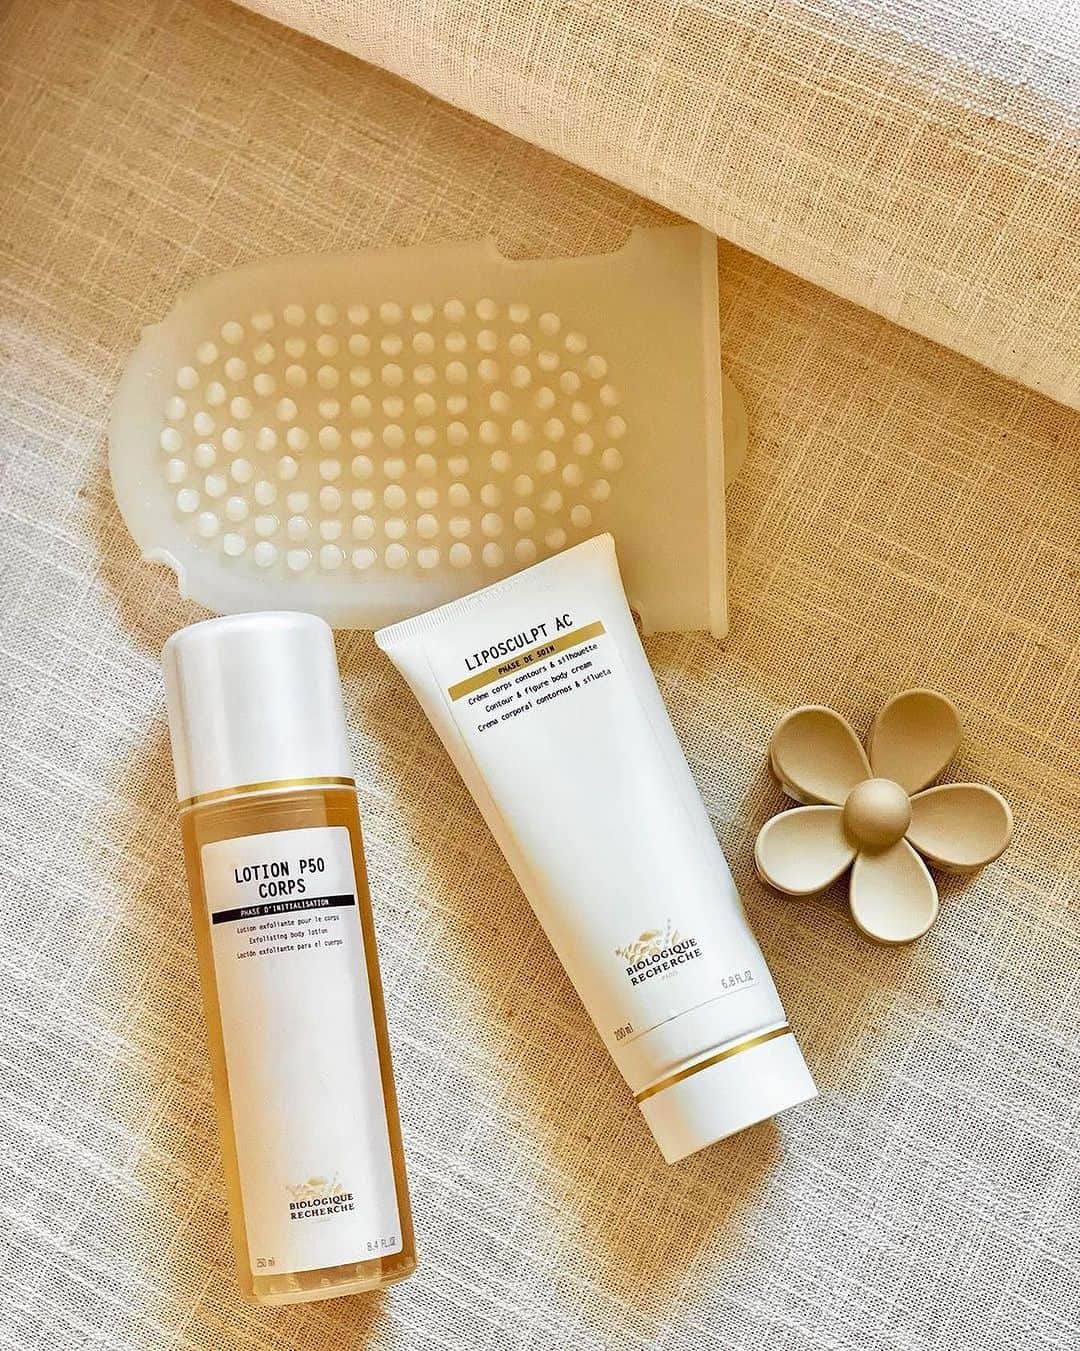 Biologique Recherche USAのインスタグラム：「Sunscreen and long lazy days in the sun may leave the skin on your body feeling extra dehydrated and in need of some TLC 🏖️  @elo.skin ‘s End-of-Summer 5 step body bath time ritual will have you feeling invigorated and good as new!  1. Dry brush for 5 minutes to induce lymphatic flow   2. Bathe + soak, towel off   3. Apply Lotion P50 Corps✨ on entire body with silicone glove (divine for blood flow + exfoliation – game changer for skin texture and your lotions will actually work and absorb properly if you do this key step)   4. Apply a firming body lotion like Liposculpt AC✨ or Crème Matricielle✨   5. Seal with a body oil – we love BR’s customized oils for your needs. Our faves are Huile Jambes Lourdes✨ for invigorating ‘heavy tired legs’ or Huile Détente✨ for the ultimate spa sensory experience. Smells heavenly!   📸: @elo.skin   #BiologiqueRecherche #FollowYourSkinInstant #BuildingBetterSkin #bodycare #LotionP50Corps #LiposculptAC #summerskin」